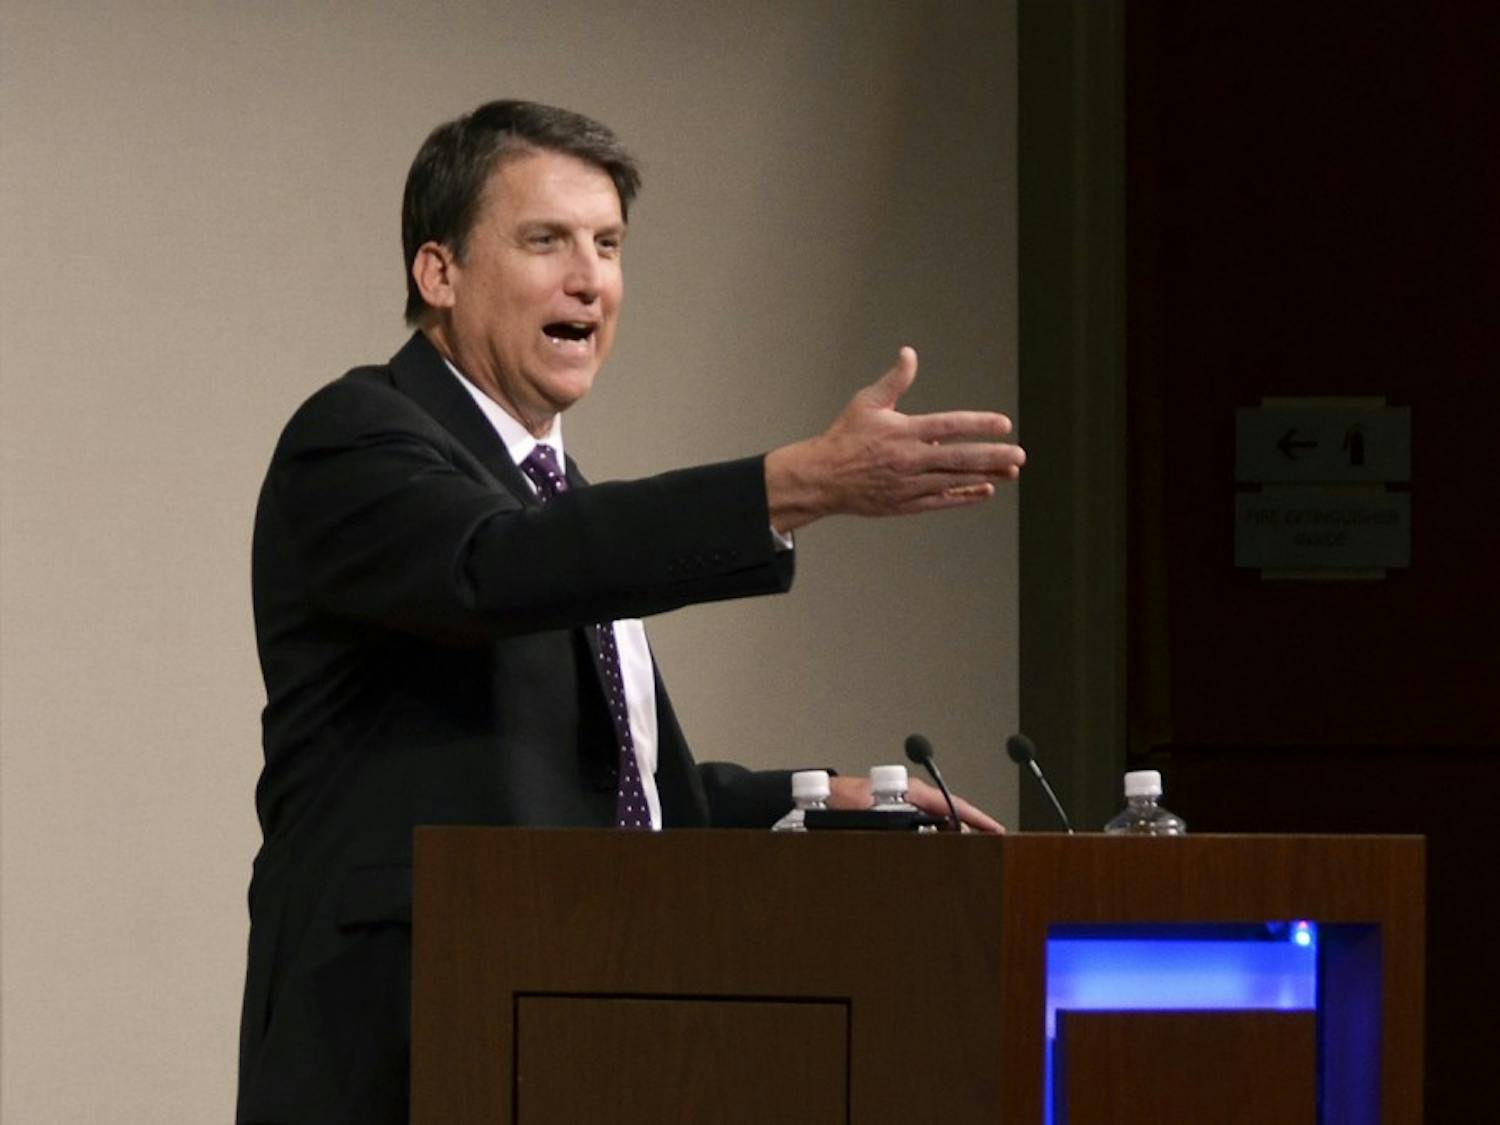 Former Gov. Pat McCrory spoke to leaders of UNC system schools about his plans for the development of education in North Carolina in January 2015.